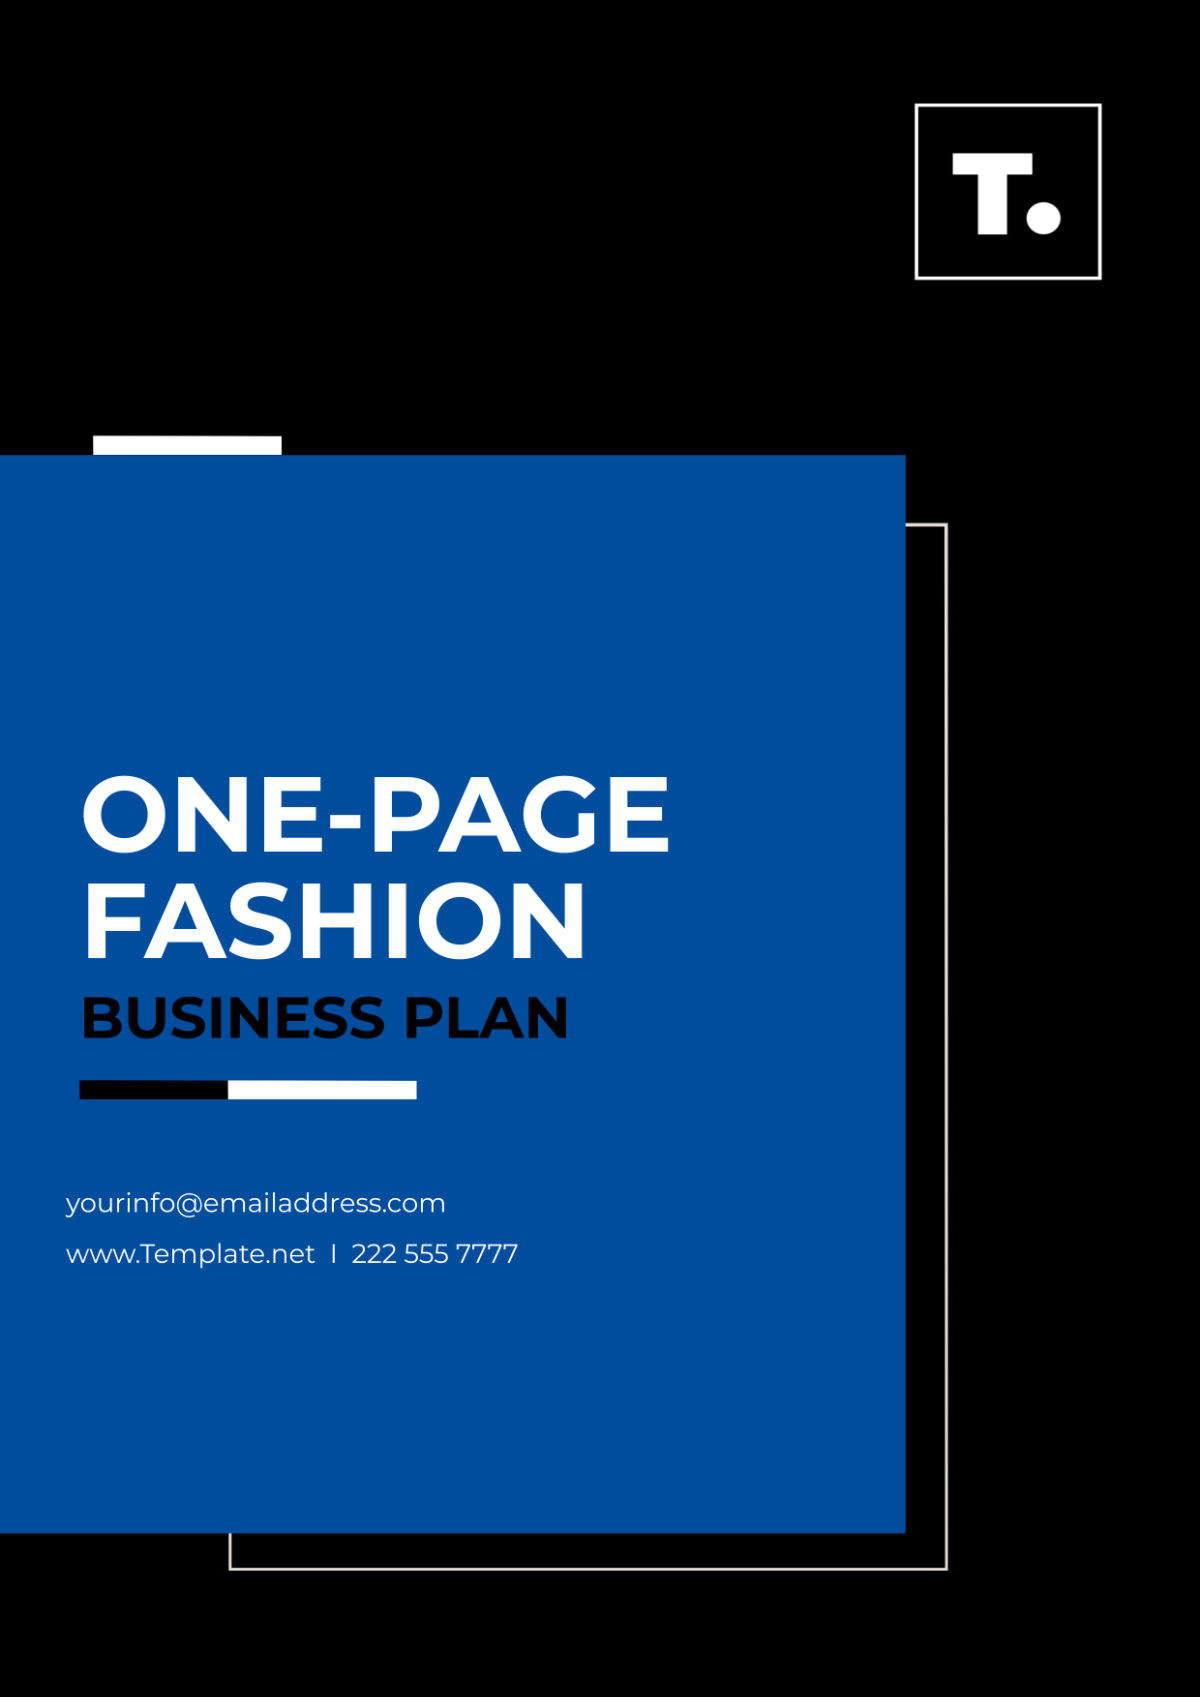 One-page Fashion Business Plan Template